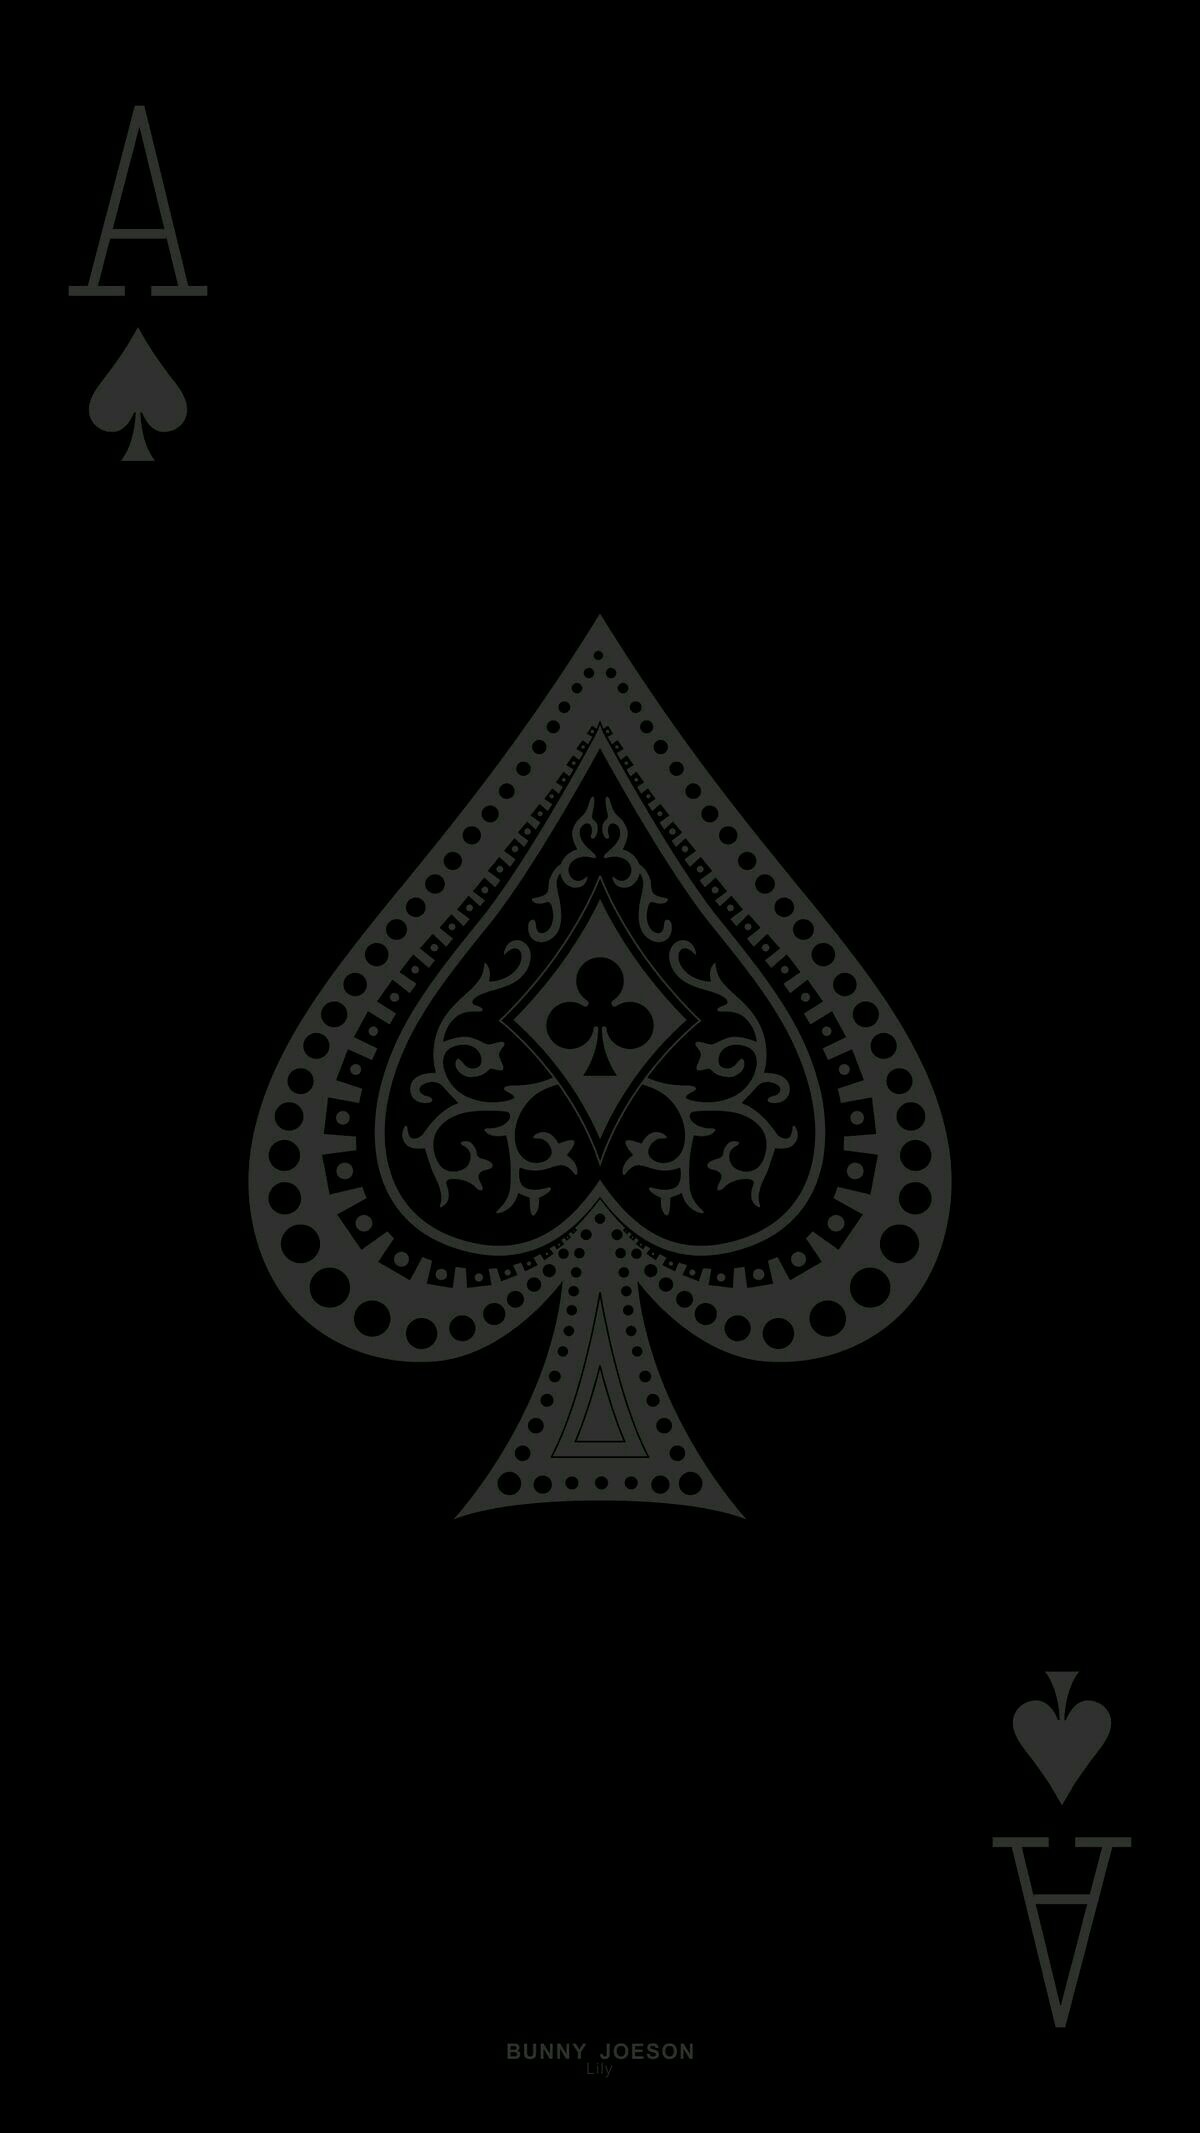 Ace of Spades Wallpapers (64+ images)